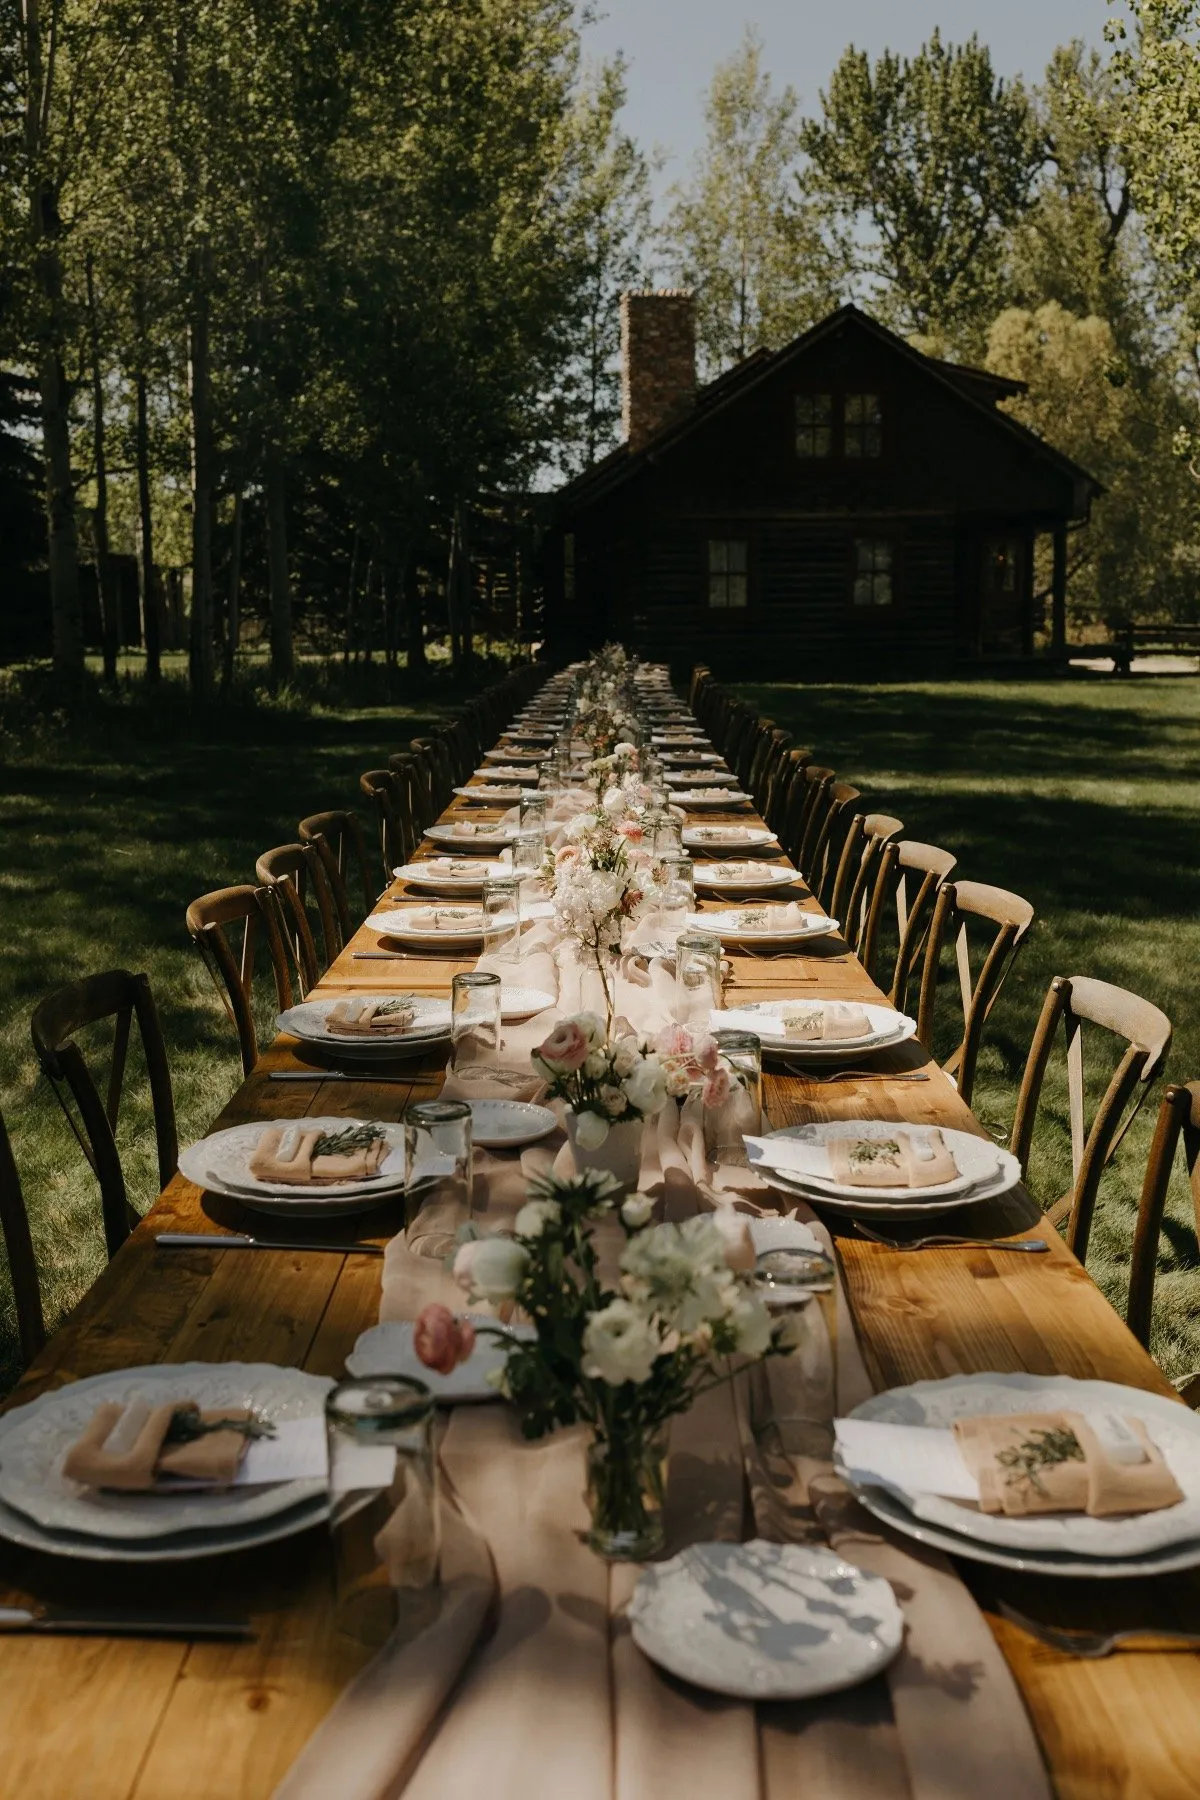 Long table set for an event outside